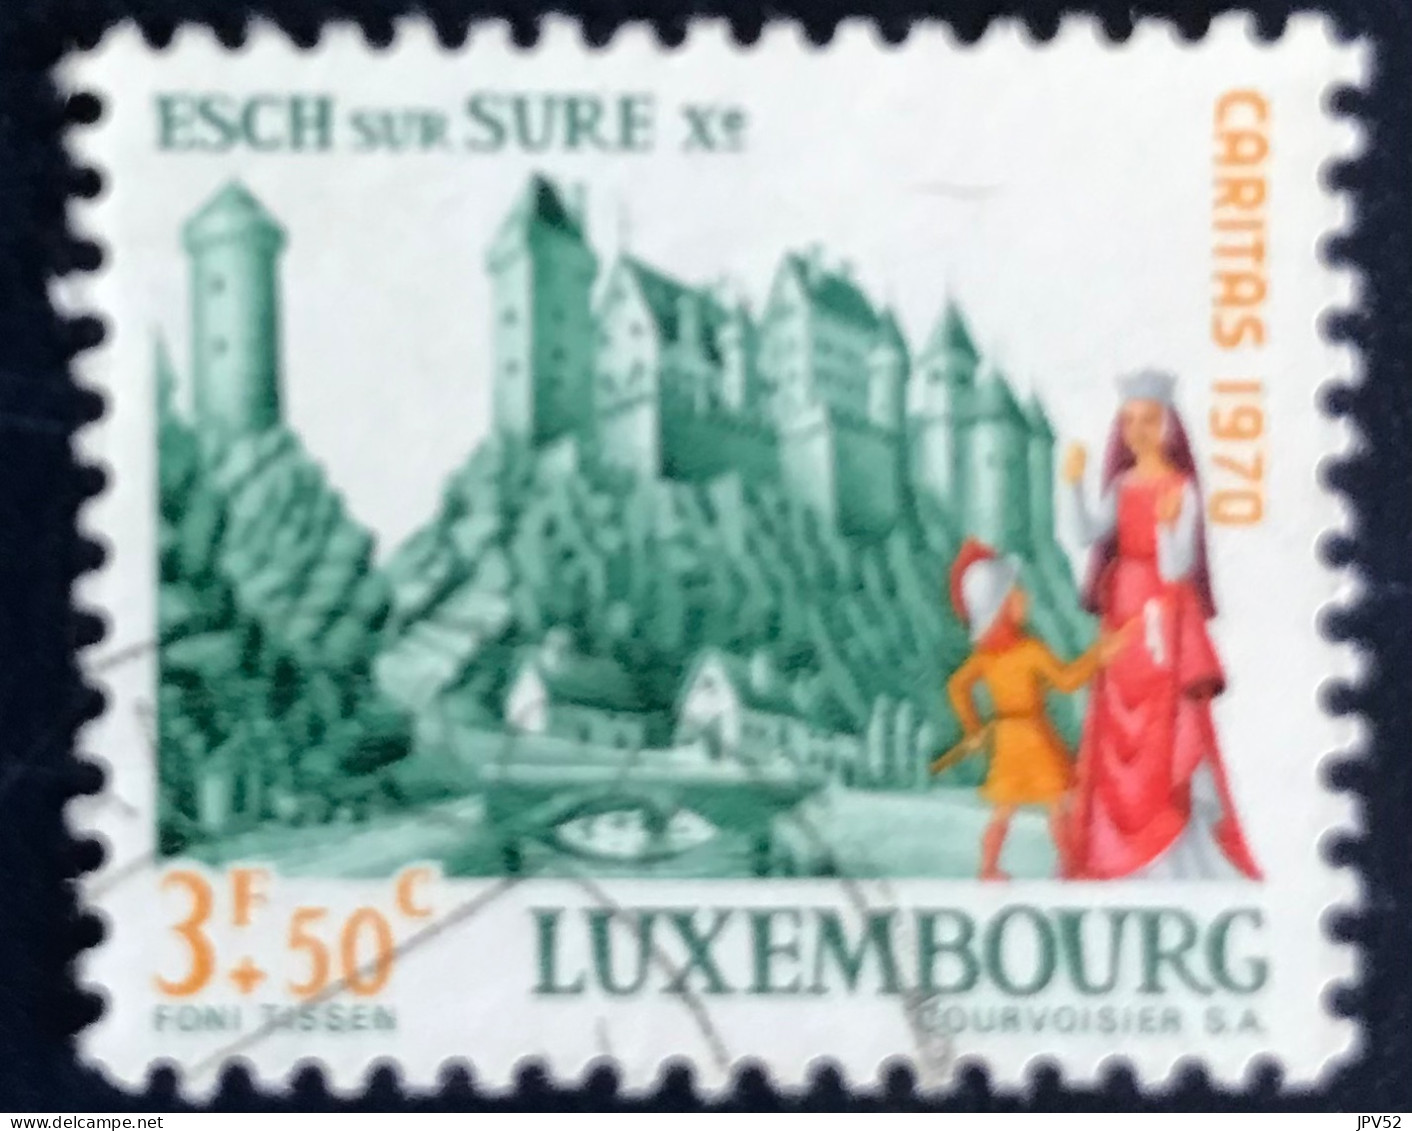 Luxembourg - Luxemburg - C18/34 - 1970 - (°)used - Michel 817 - Kasteel Esch-sur-Süre - Used Stamps